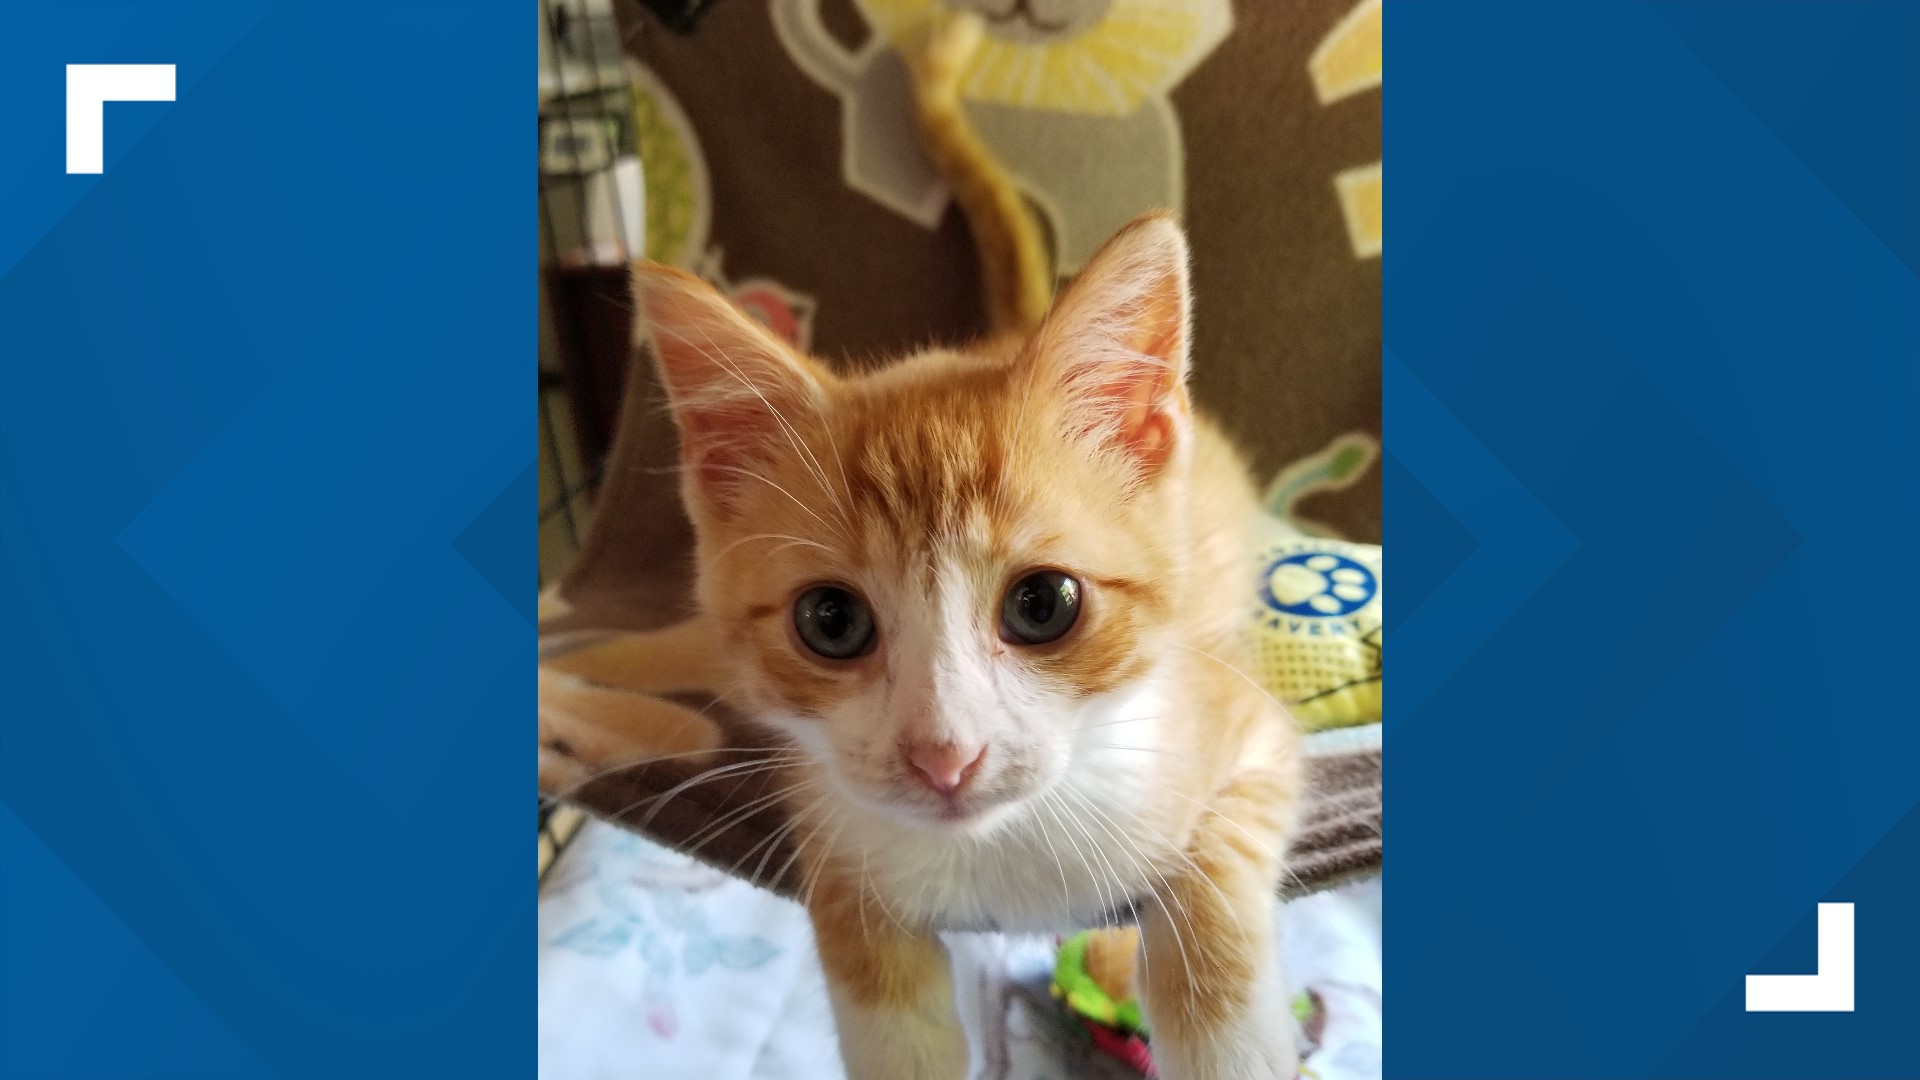 This week's Furry Friend is an 8-year-old kitten named Hogan.